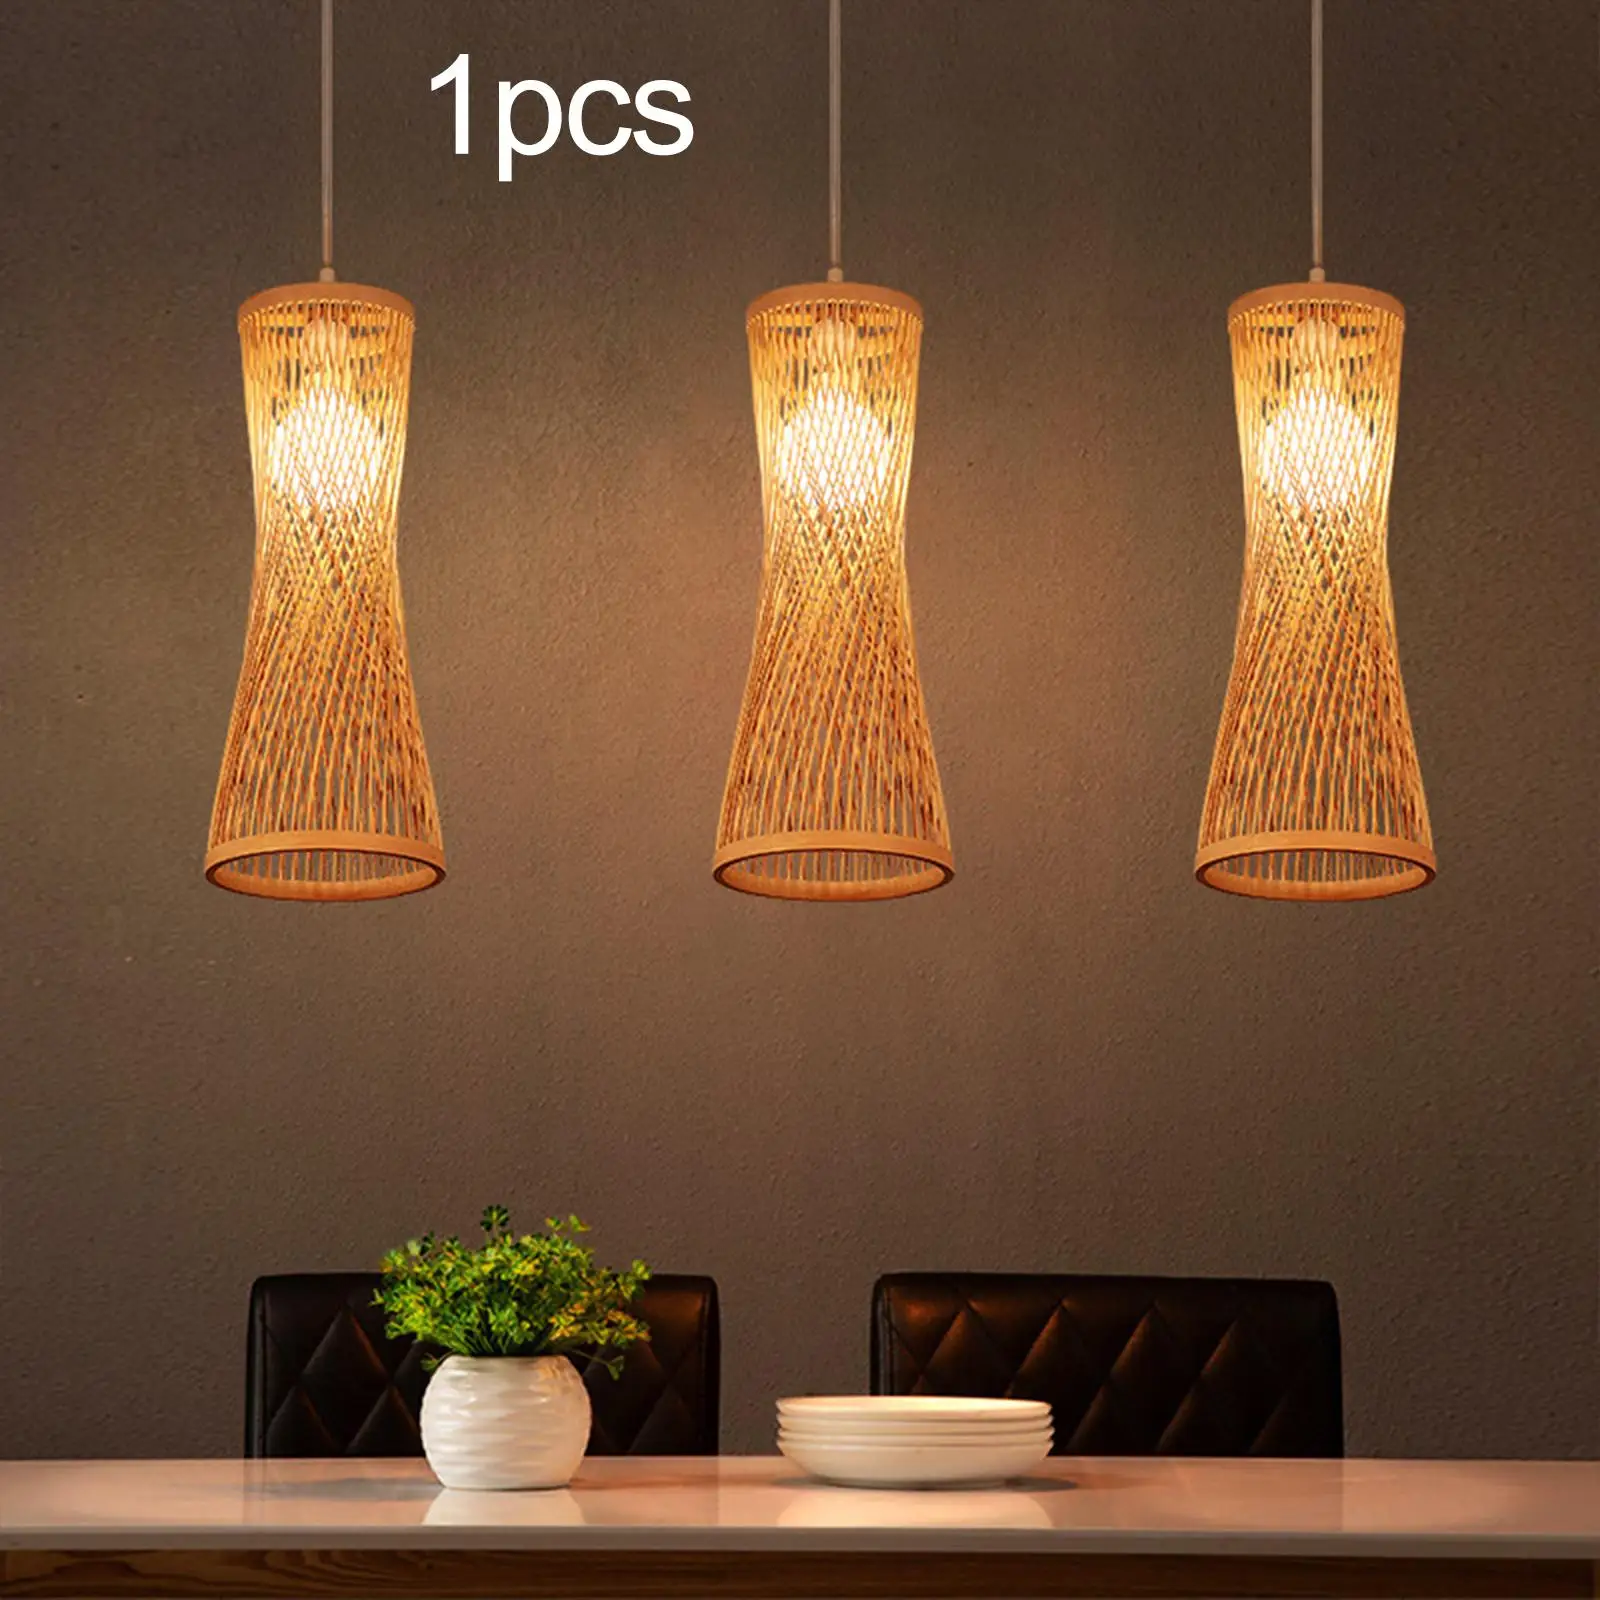 Bamboo Woven Lampshade Creative Handmade Light Fixture Cover Pendant Light Shade for Coffee Shop Living Room Office Home Kitchen